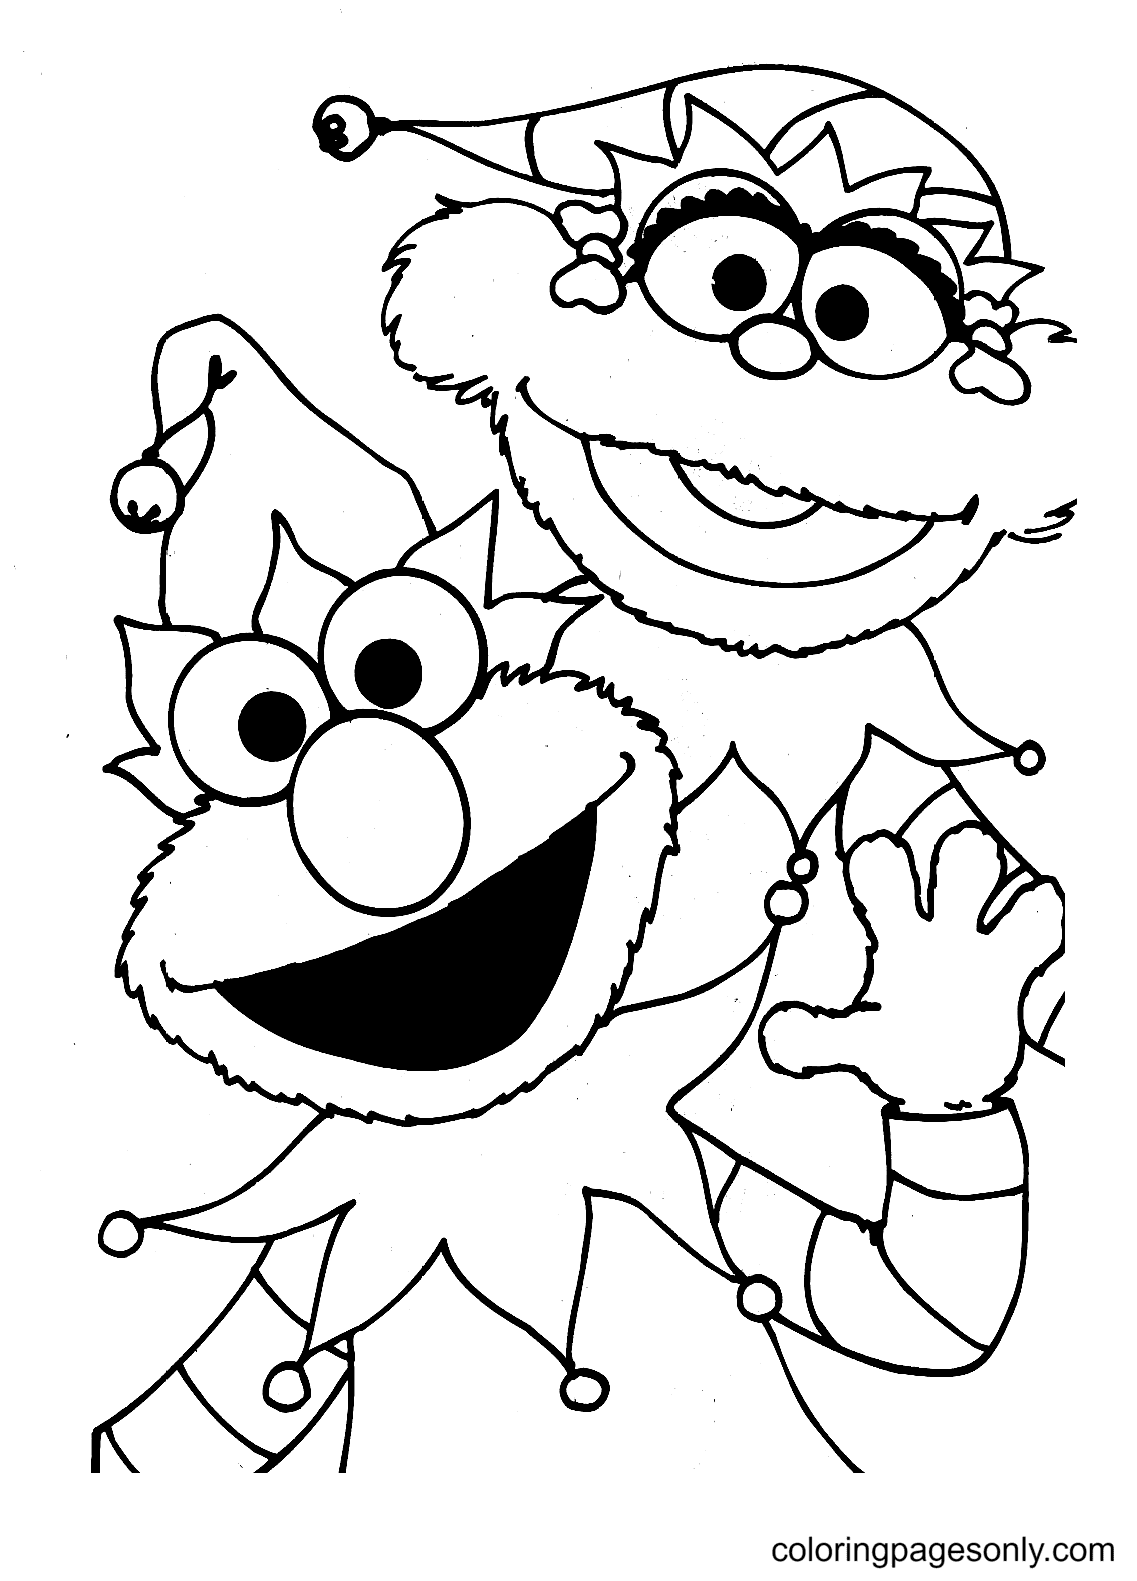 Elmo and Abby Coloring Page